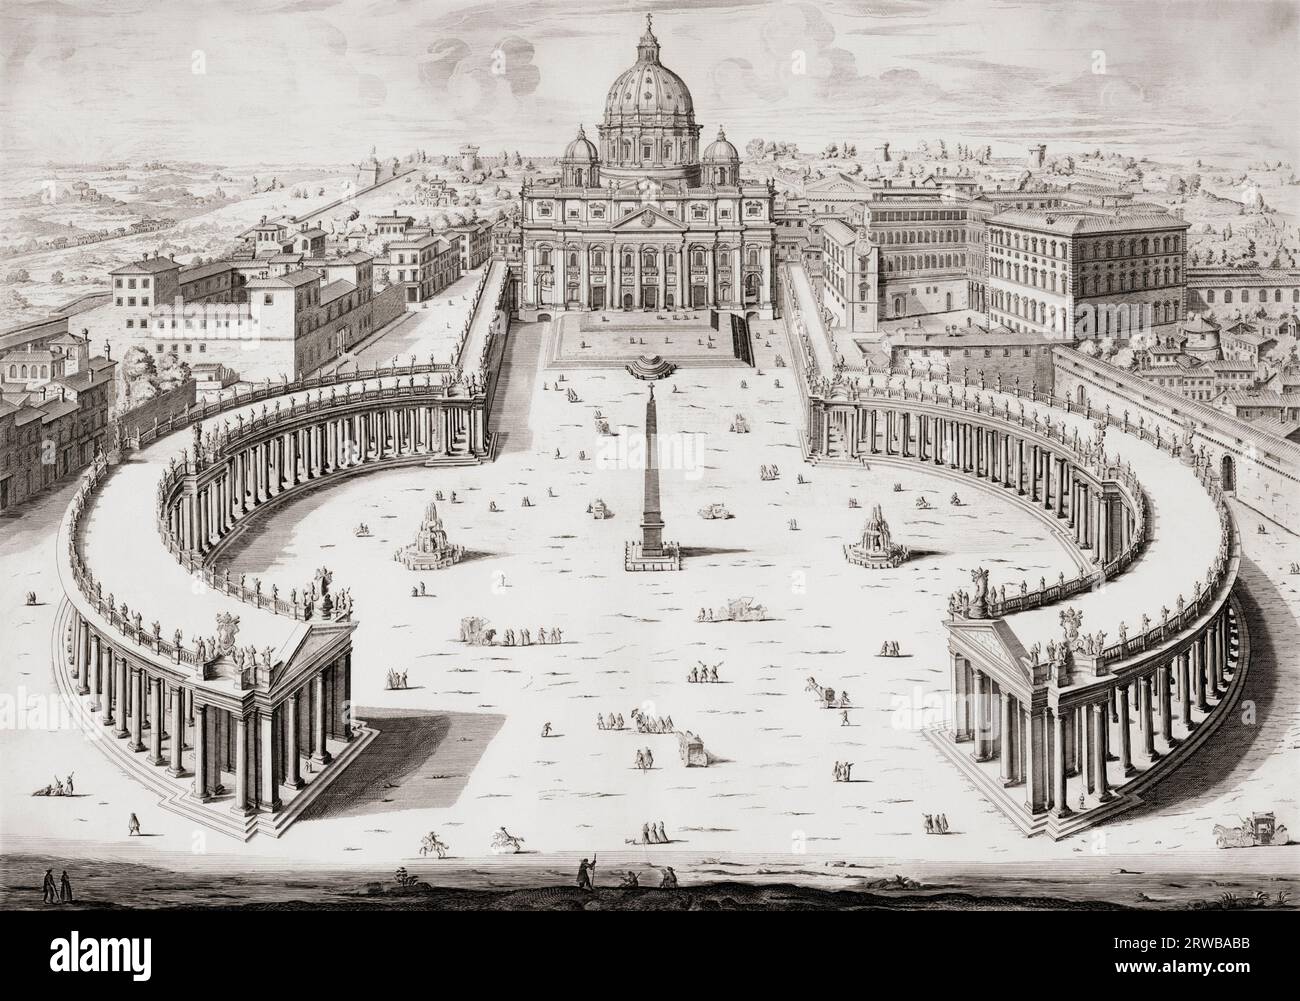 View of St Peter's Square, St Peter's Basilica and the Vatican in the 17th century.  After a print by Giovanni Battista Falda. Stock Photo